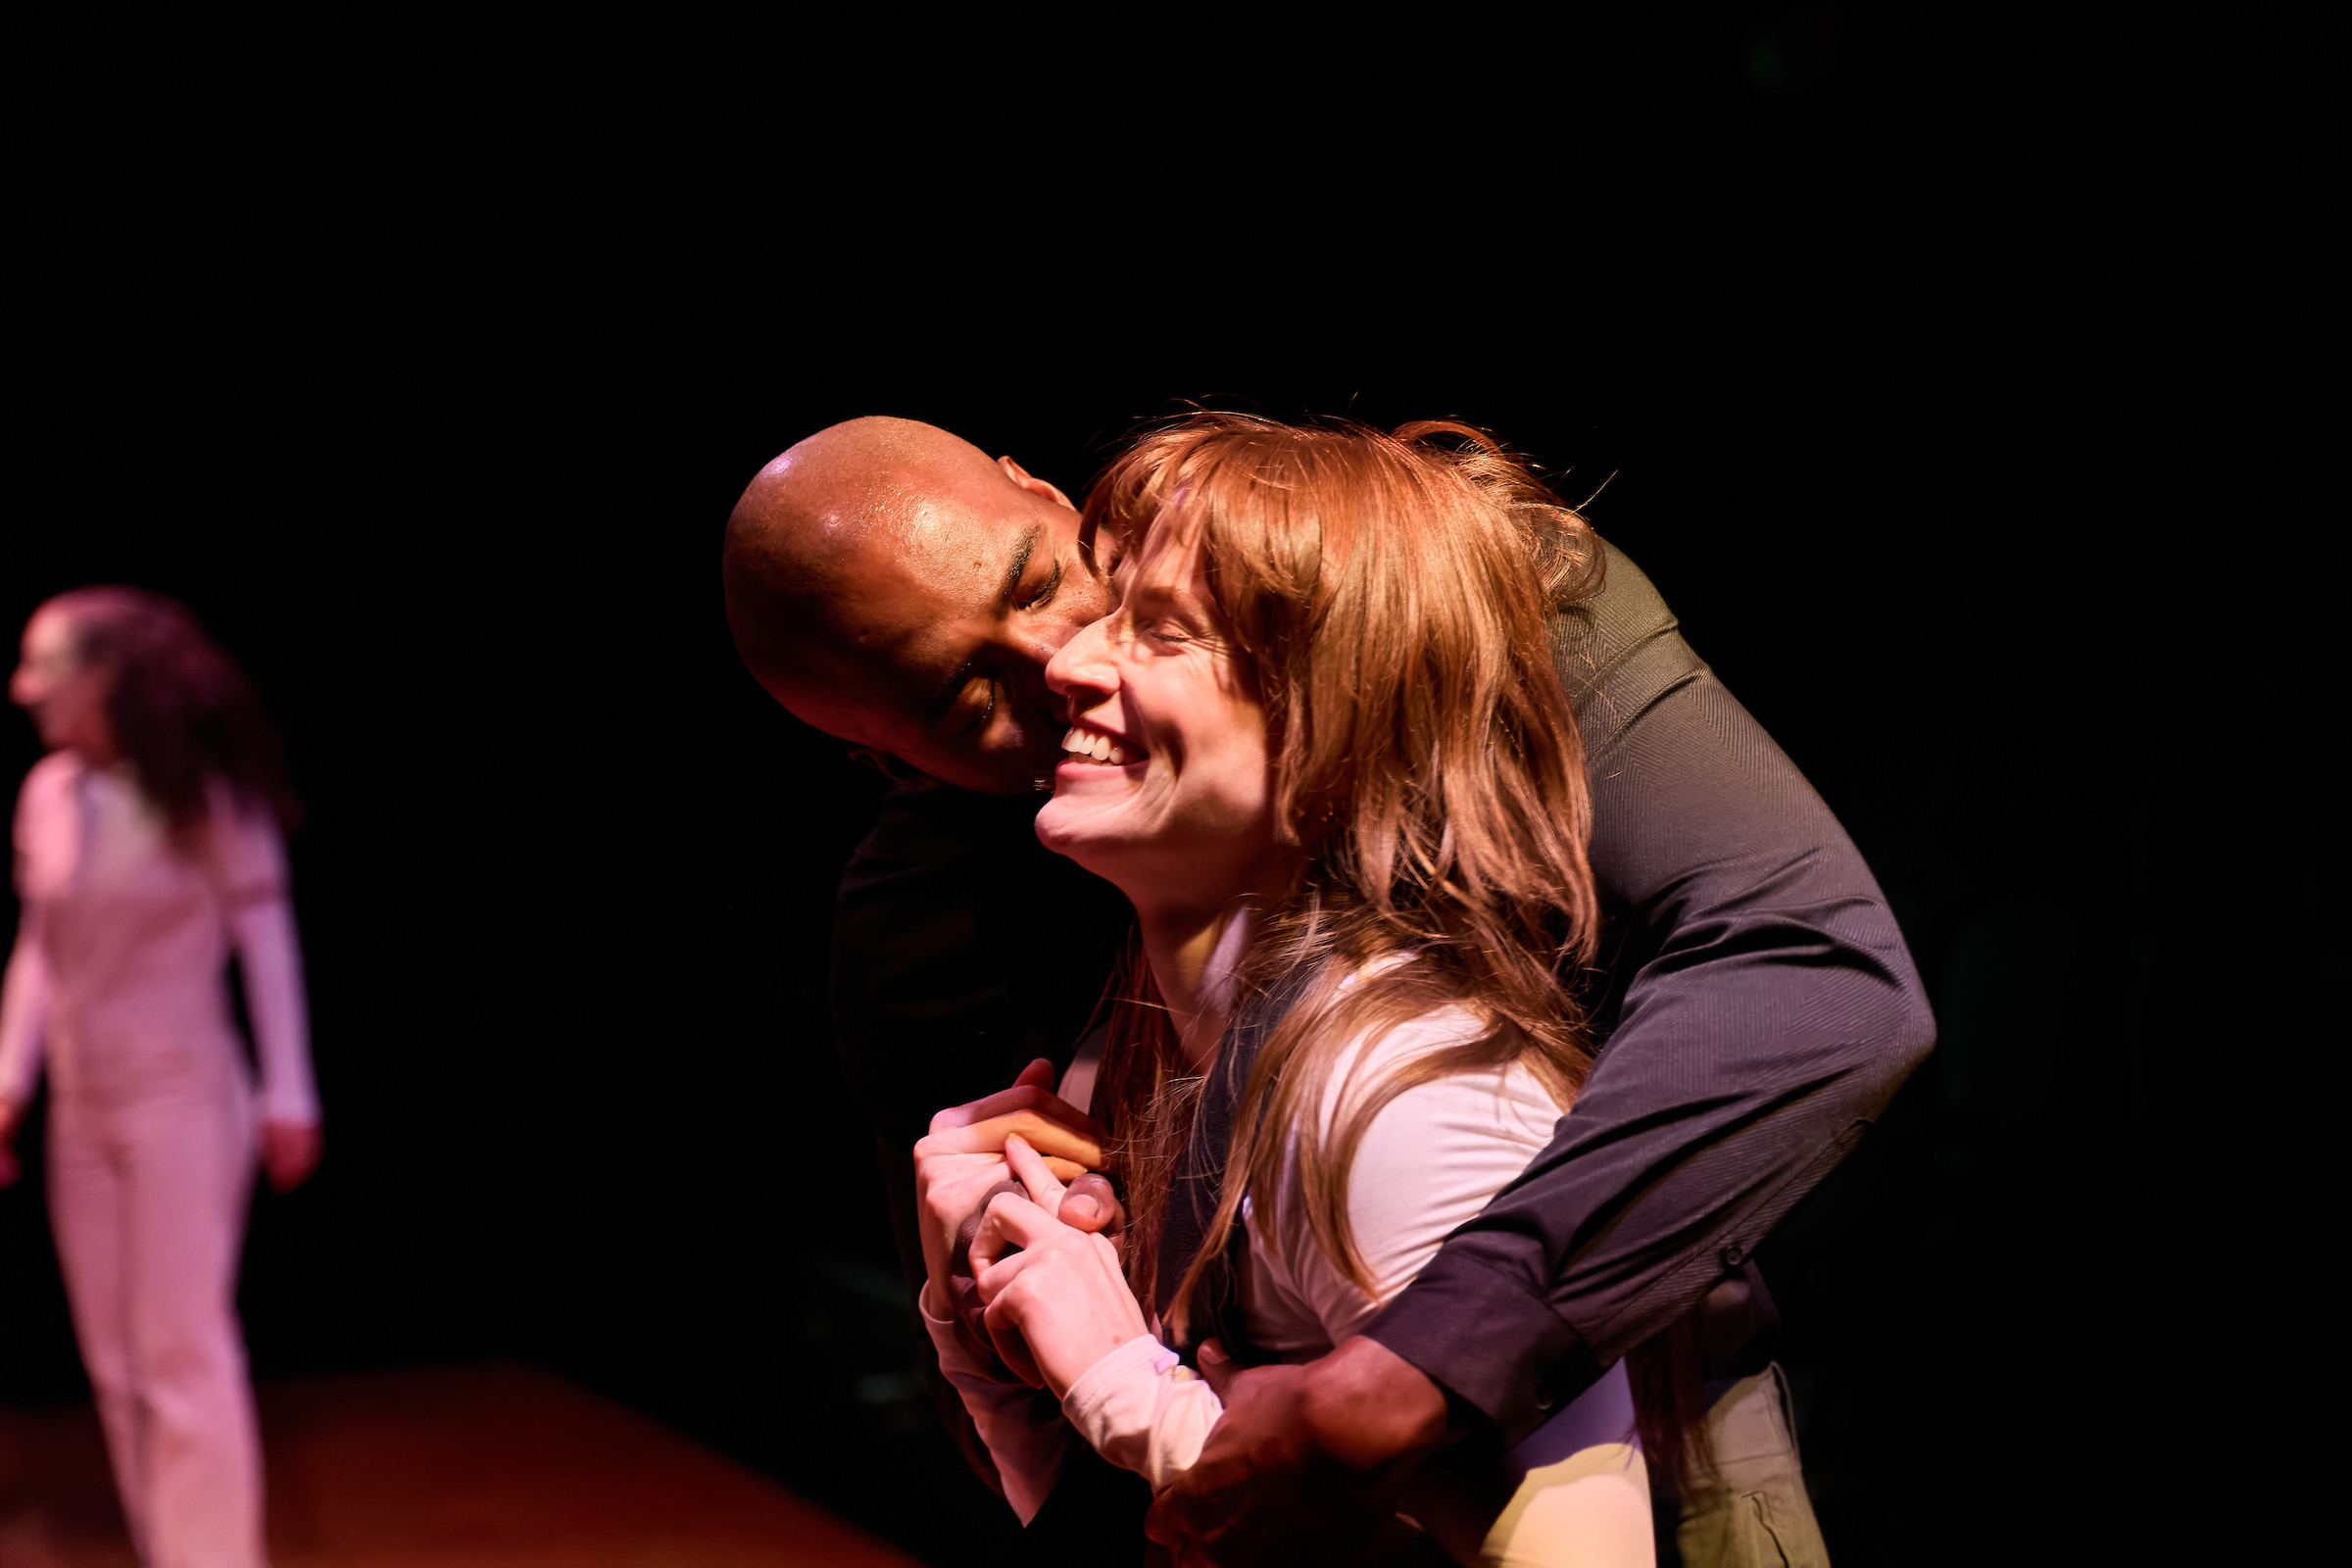 Martins Imhangbe (Othello) and Rose Riley (Desdemona) in Othello, Photo by Mark Douet